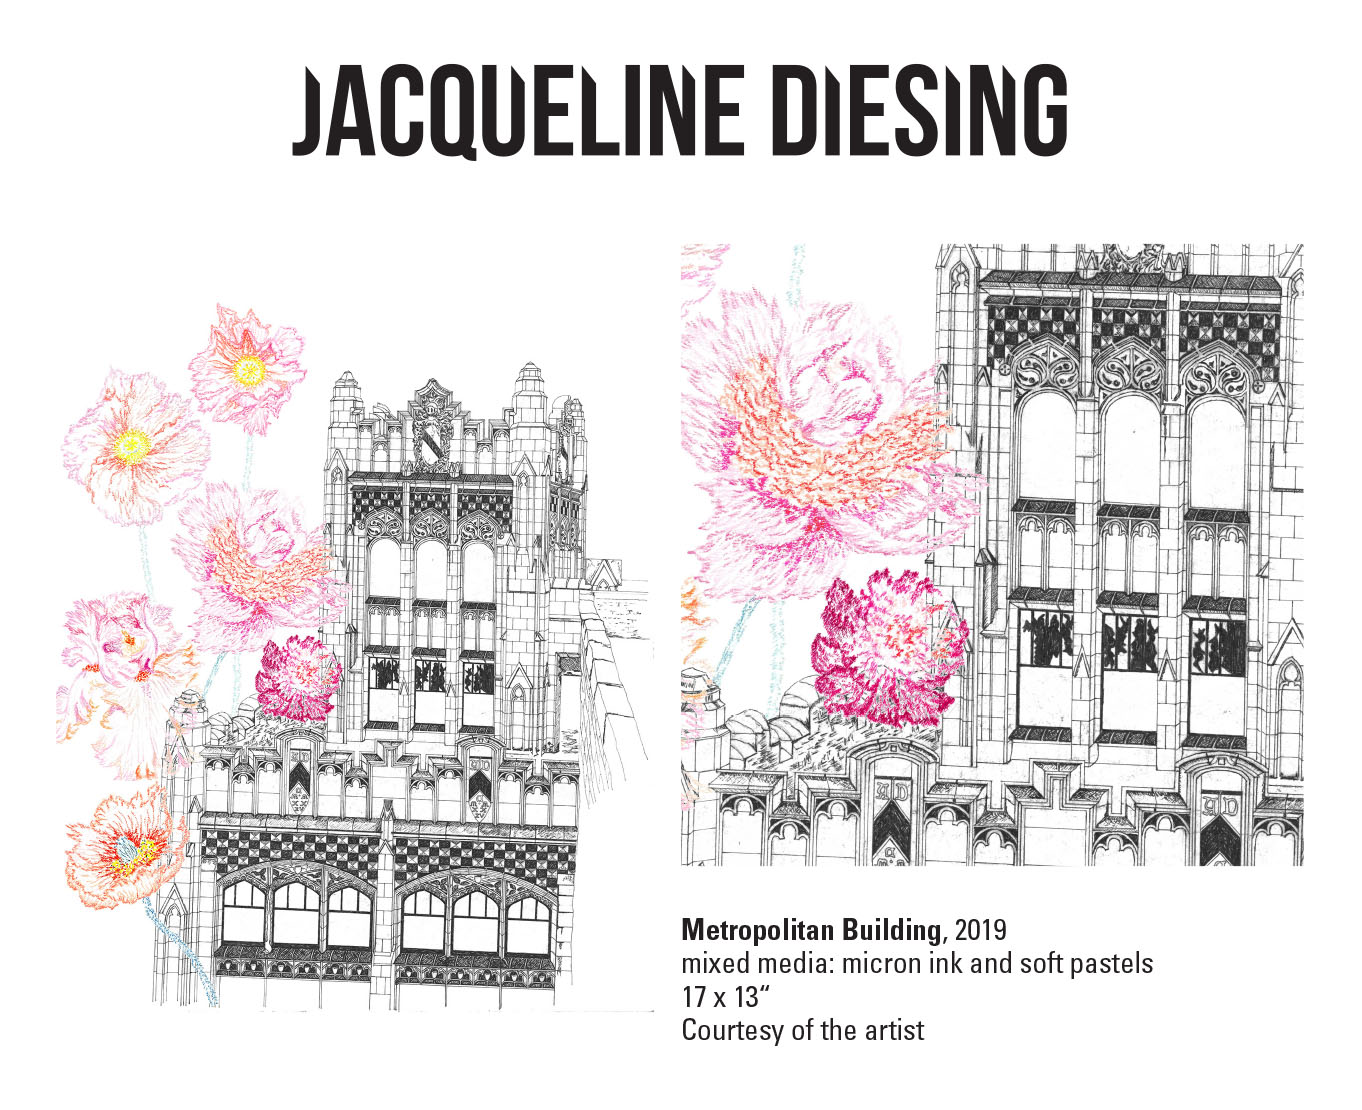 Jaqueline Diesing, Metropolitan Building, 2019. Mixed media: micron ink and soft pastels. 17 x 13“ Courtesy of the artist. A drawing of a building with large pink and purple flowers coming out from behind the building